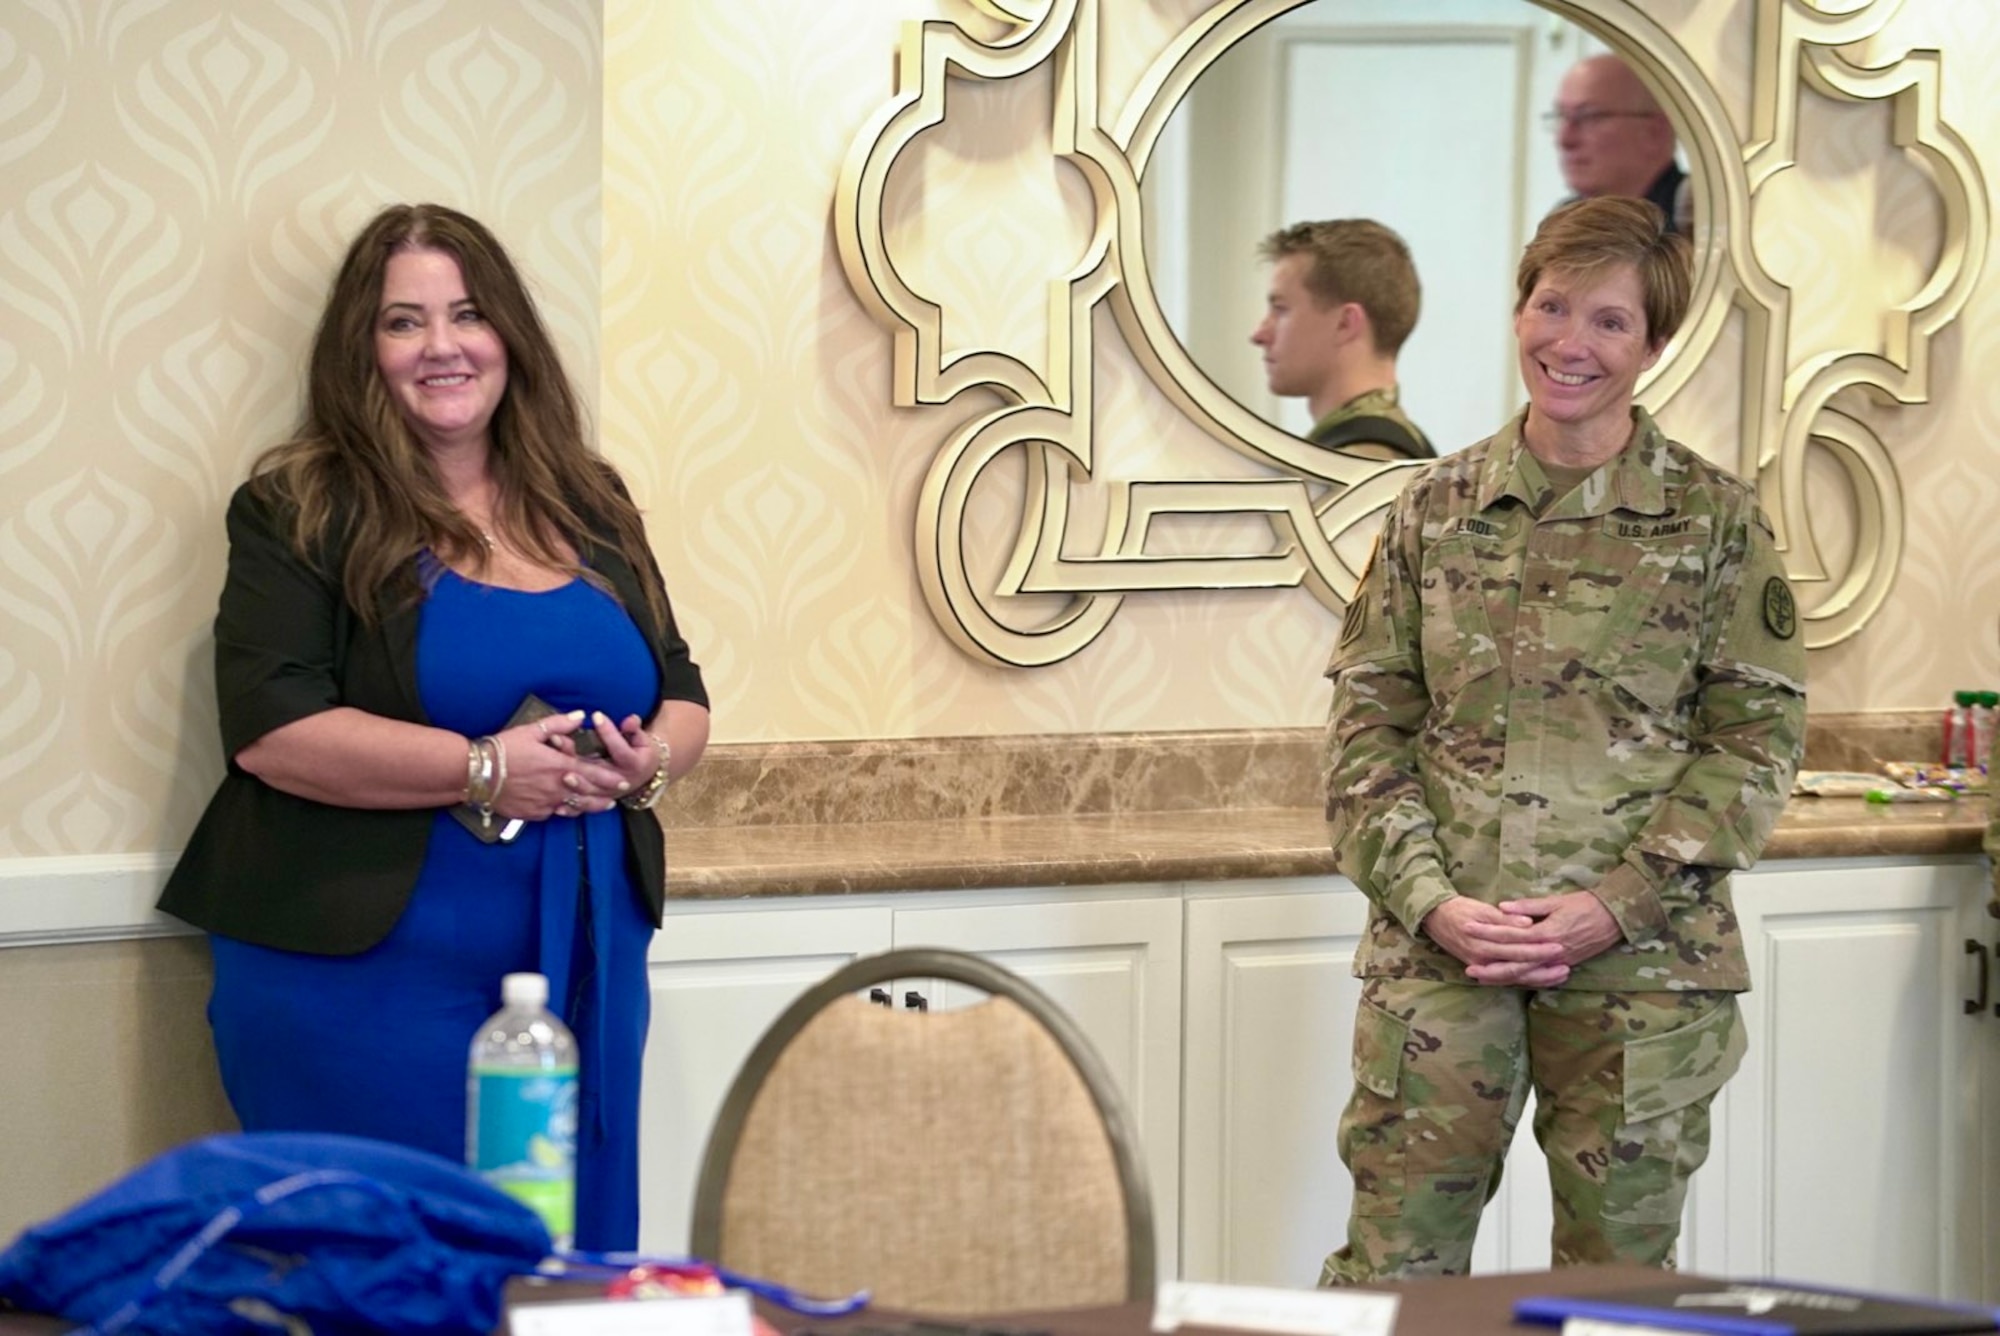 This week more than 140 warriors and caregivers attended the Warrior CARE Event in San Antonio, Texas. This was the second time the Air Force Wounded Warrior (AFW2) Program hosted a hybrid event where people attended in-person and virtually, and to say it was a success would be an understatement.